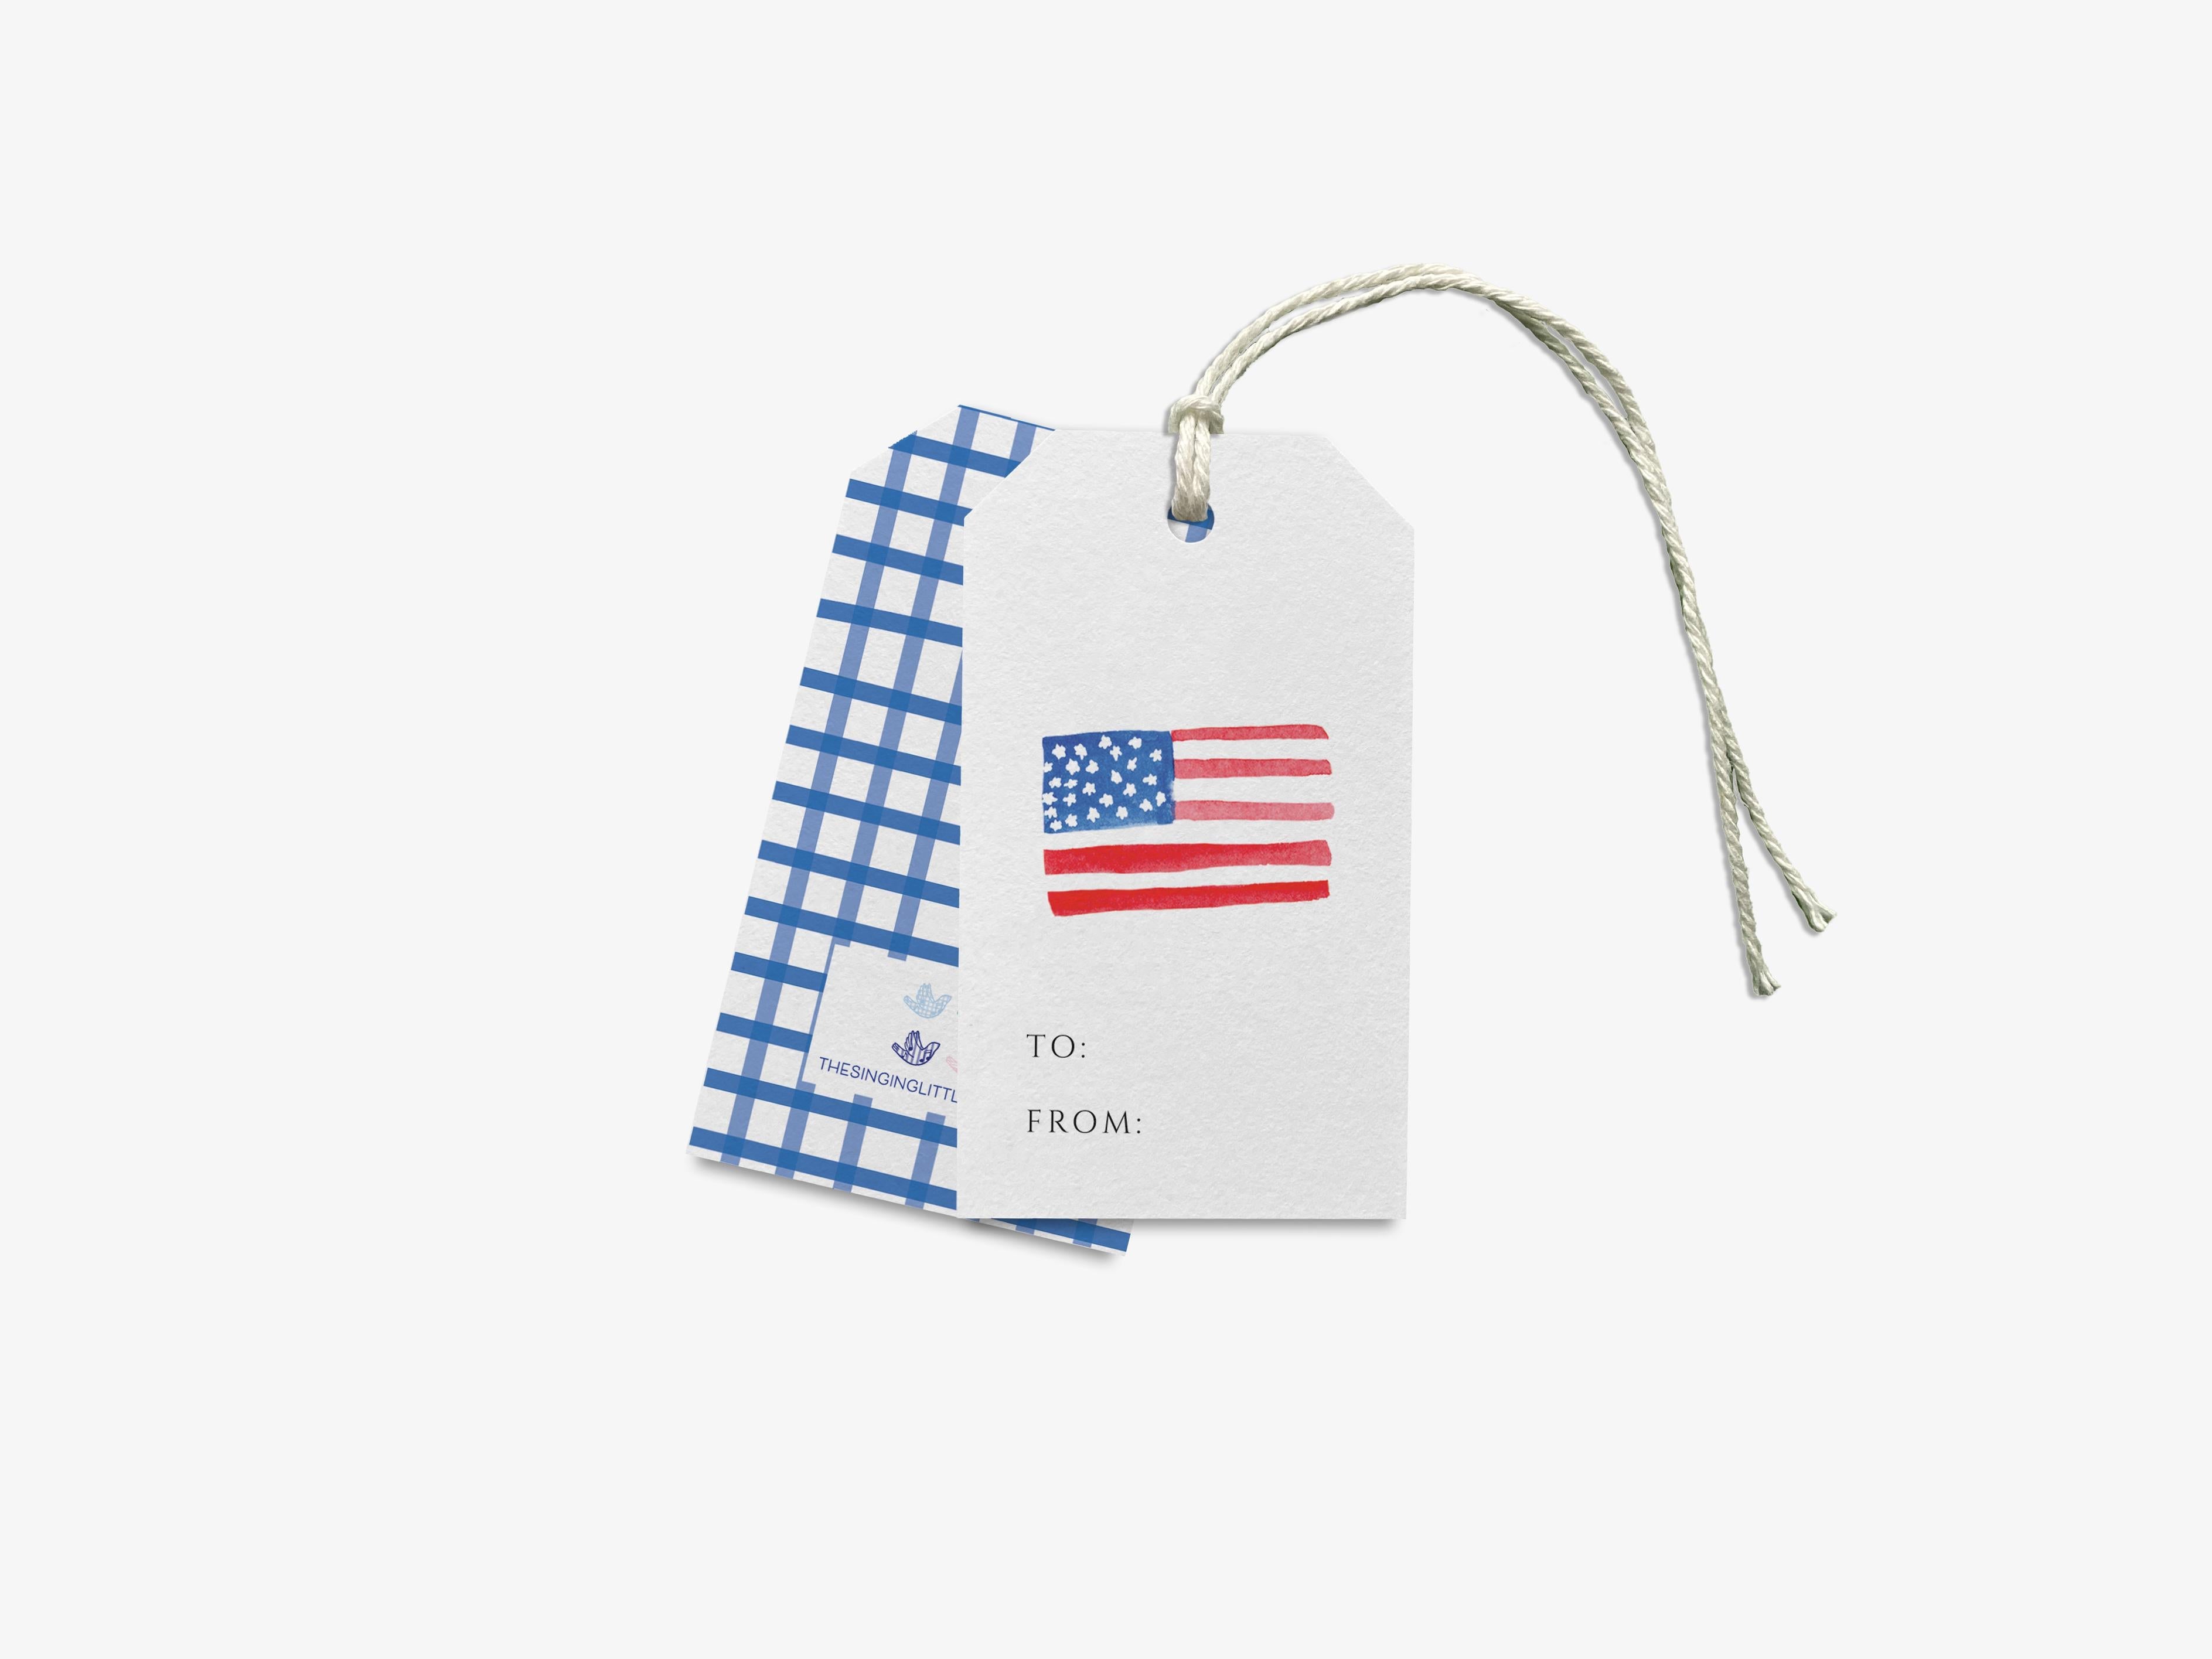 American Flag Gift Tags [Set of 8]-These gift tags come in sets, hole-punched with white twine and feature our hand-painted watercolor American flags, printed in the USA on 120lb textured stock. They make great tags for gifting or gifts for the USA lover in your life.-The Singing Little Bird